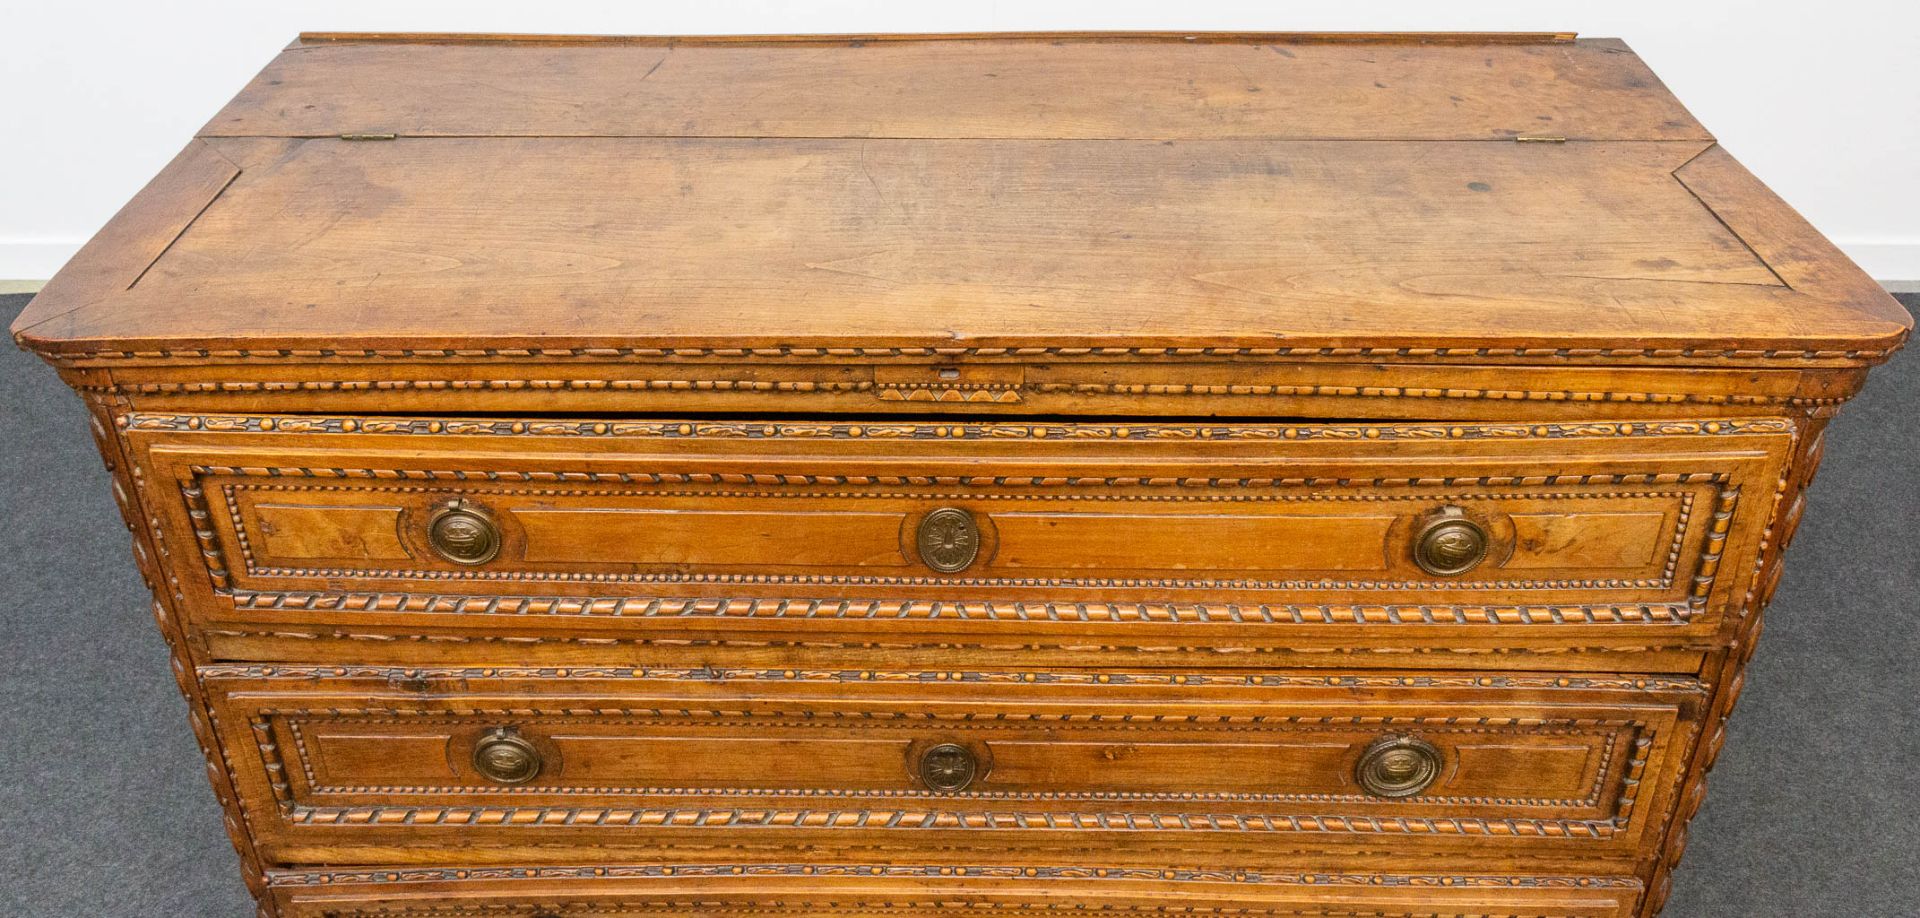 A wood sculptured commode in Louis XVI style, with 3 drawers and a hidden desk. 18th century. - Bild 20 aus 23